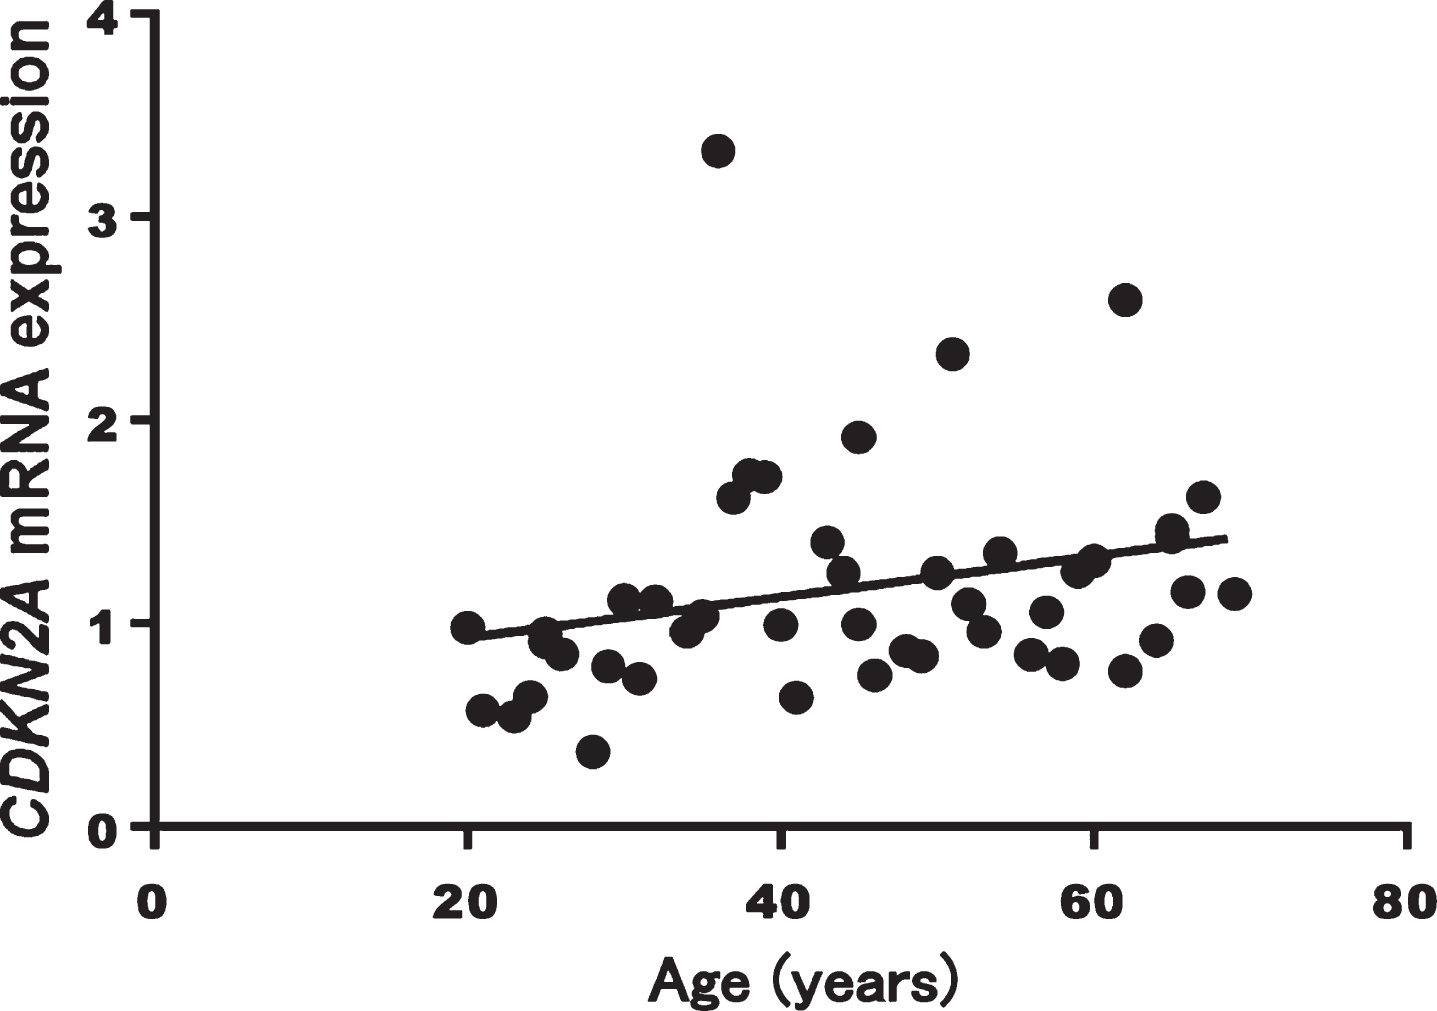 Correlation between CDKN2A mRNA expression and age in healthy volunteers (p = 0.005, r = 0.407)